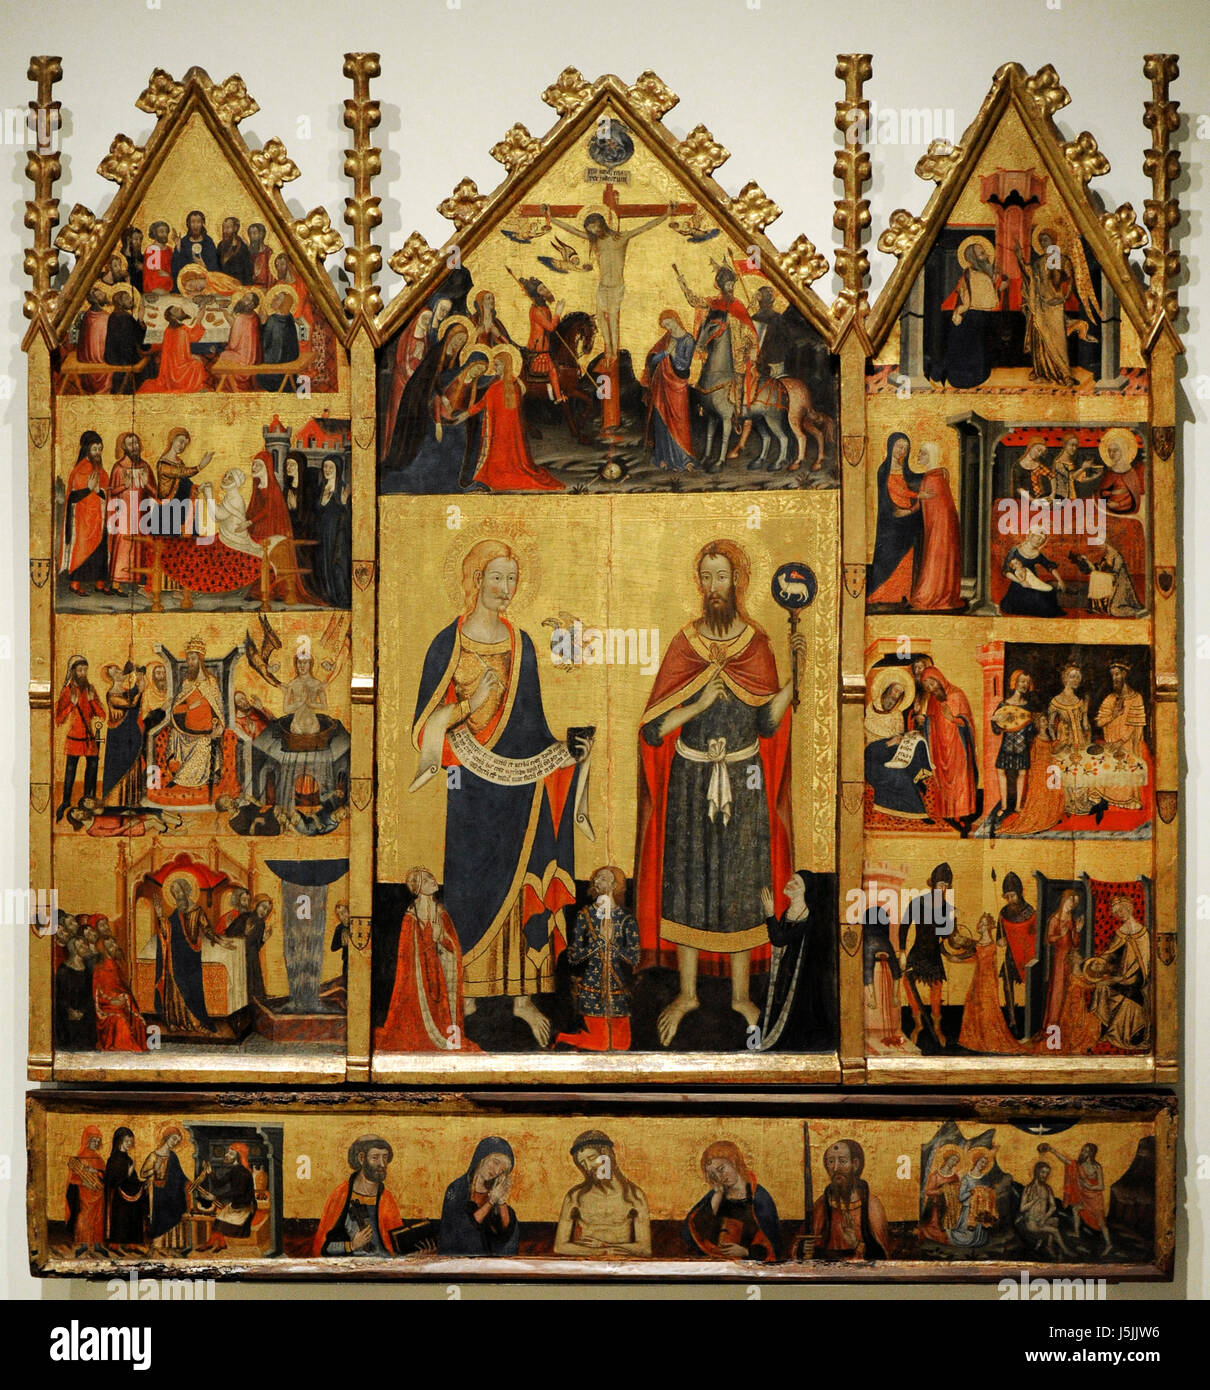 Master of Santa Coloma de Queralt (active in the third quarter of the 14th century). Altarpiece of the Saints John. ca.1356. From the Chapel of the Castle of Santa Coloma de Queralt (Catalonia). National Art Museum of Catalonia. Barcelona. Catalonia. Spain. Stock Photo